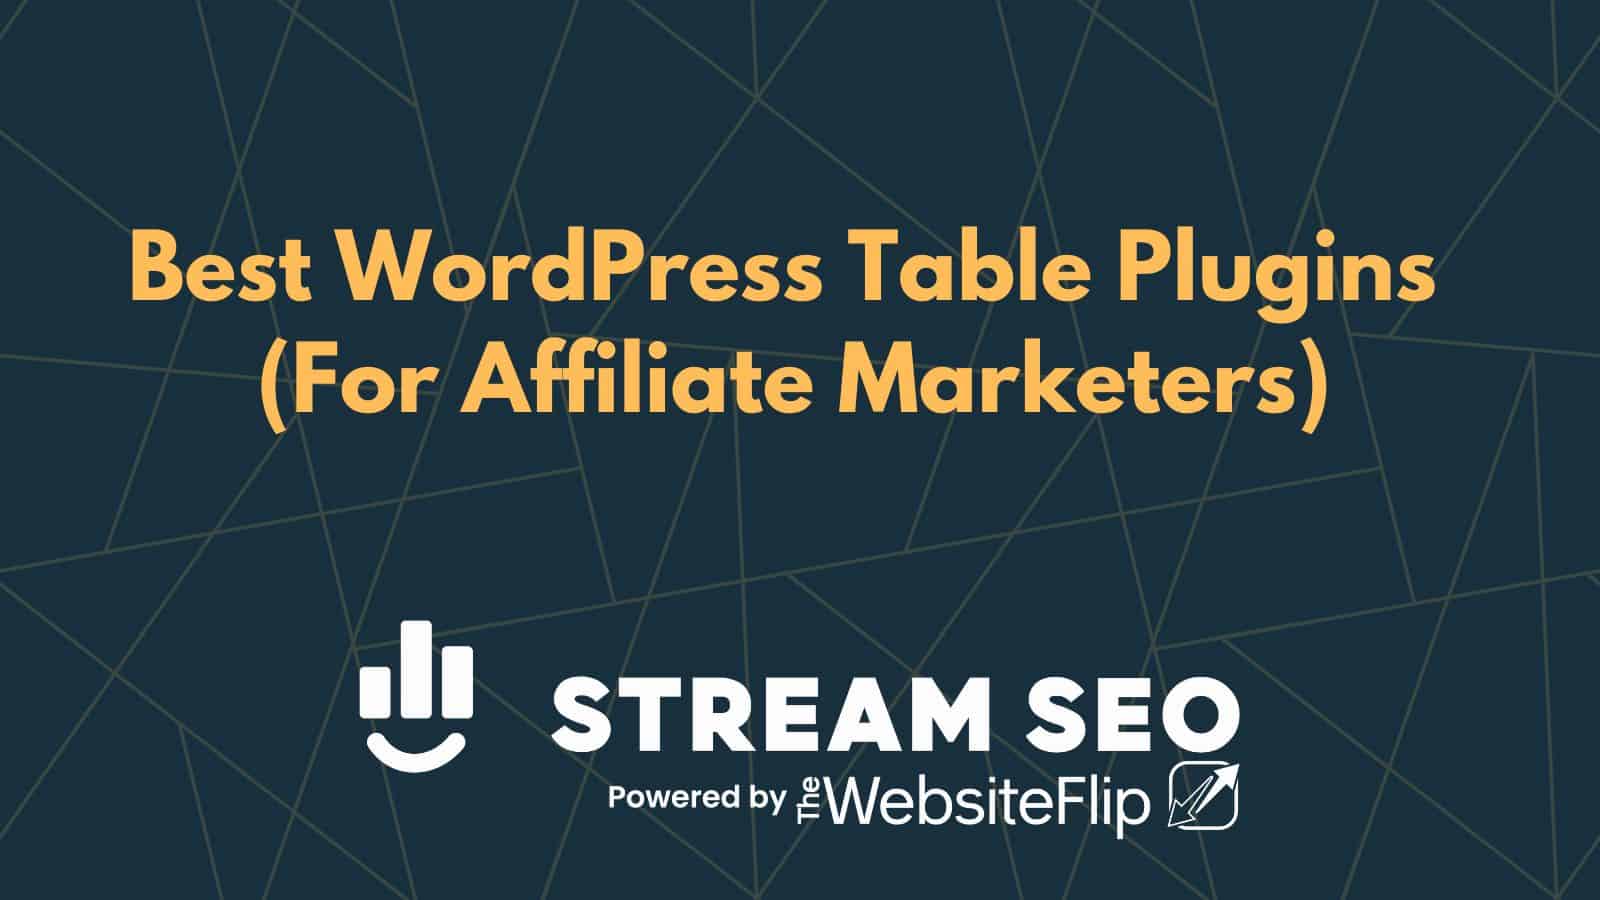 7 Best WordPress Table Plugins (For Affiliate Marketers)